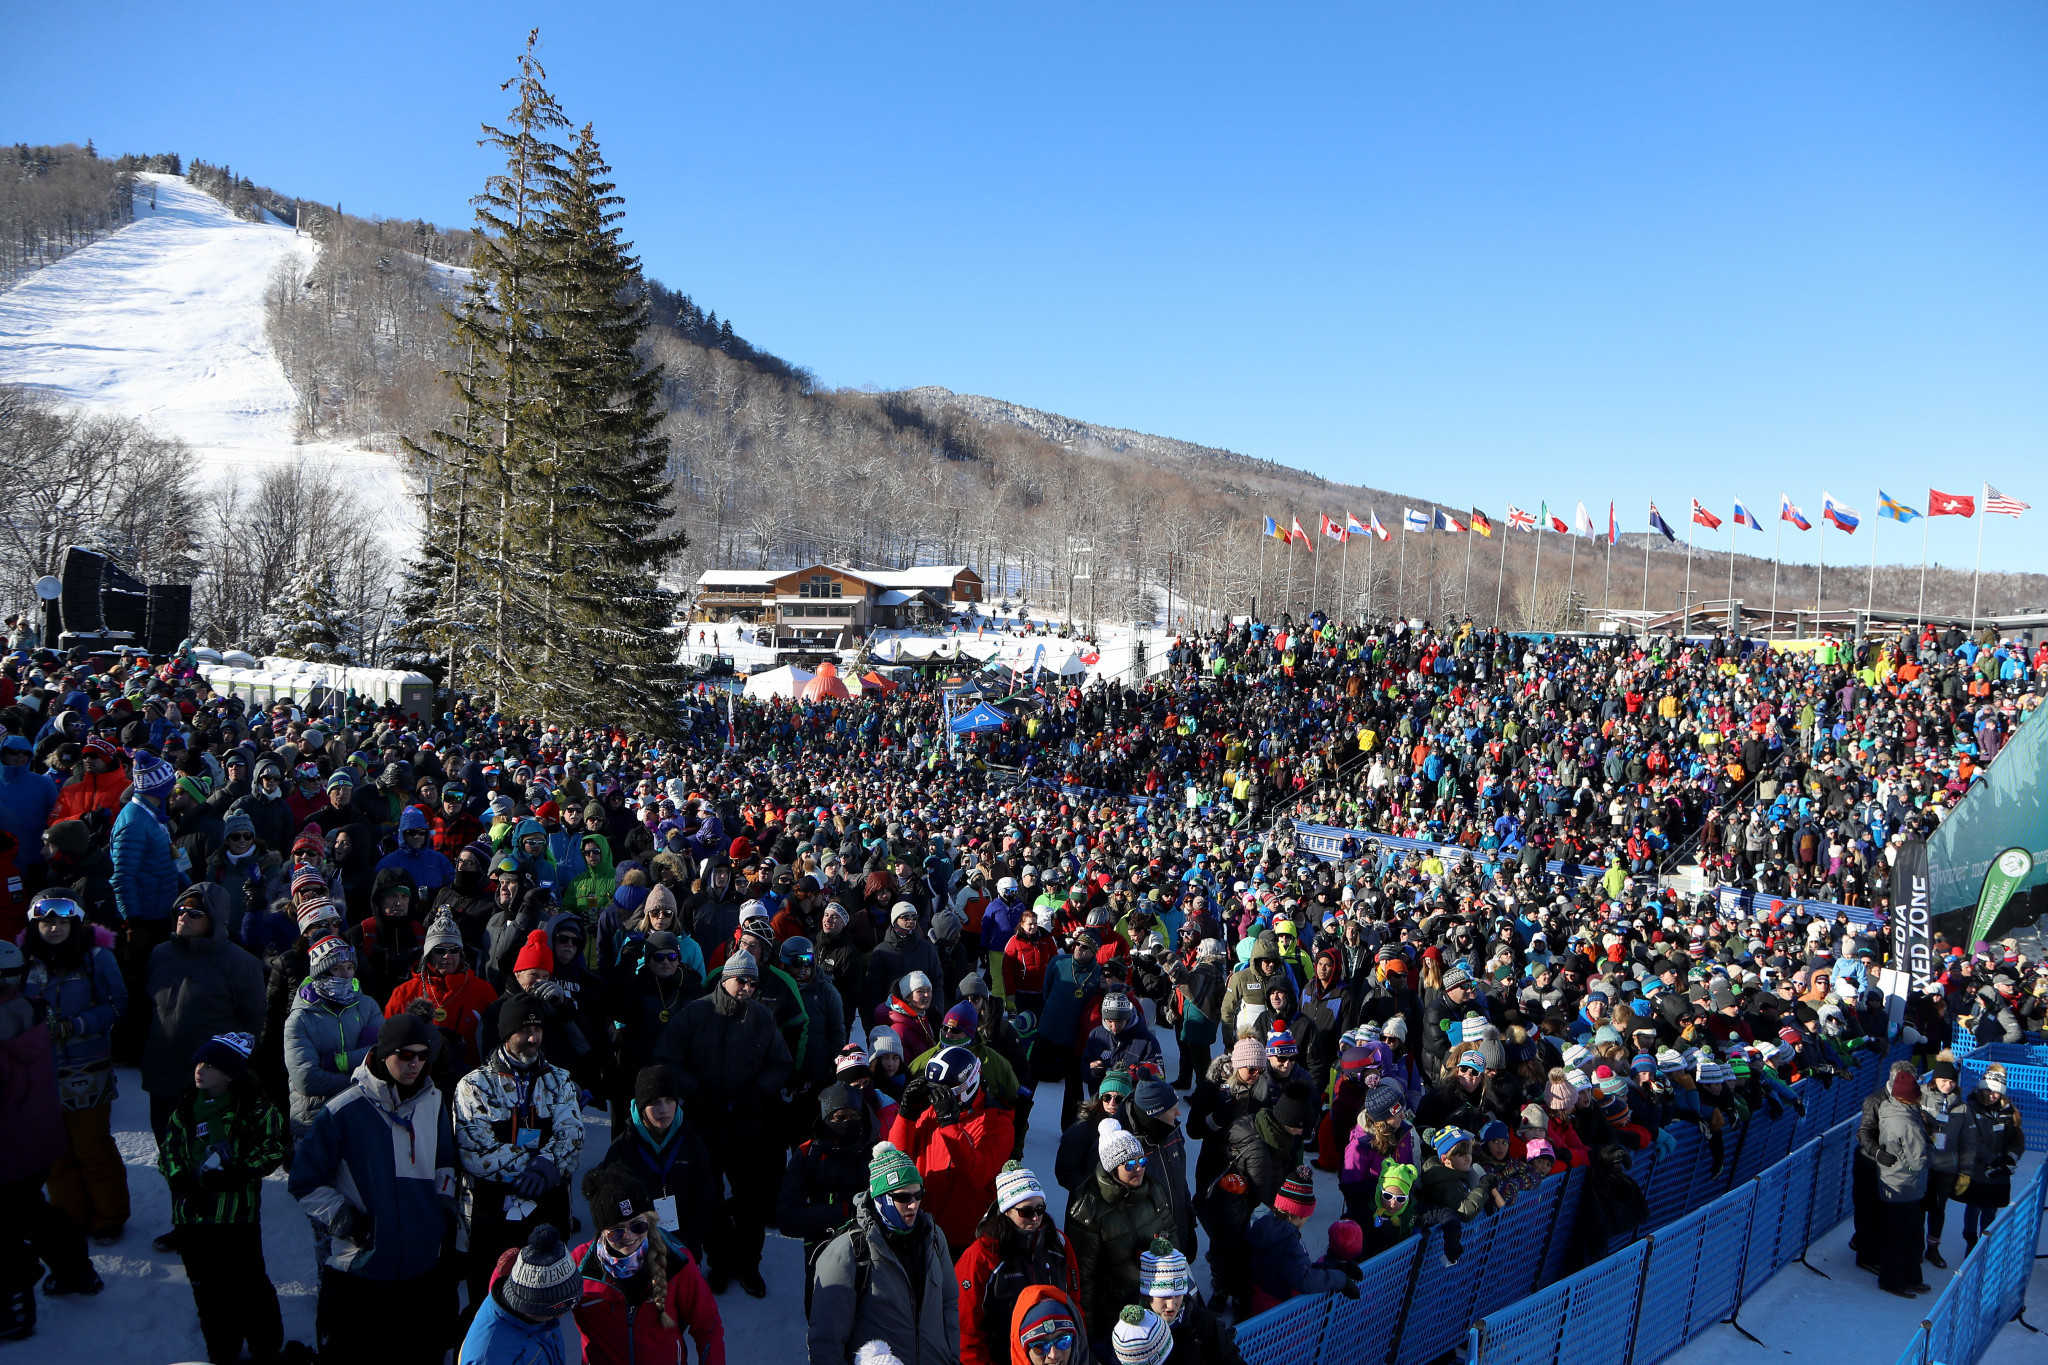 Killington is a regular host on the FIS Alpine World Cup circuit ©Getty Images